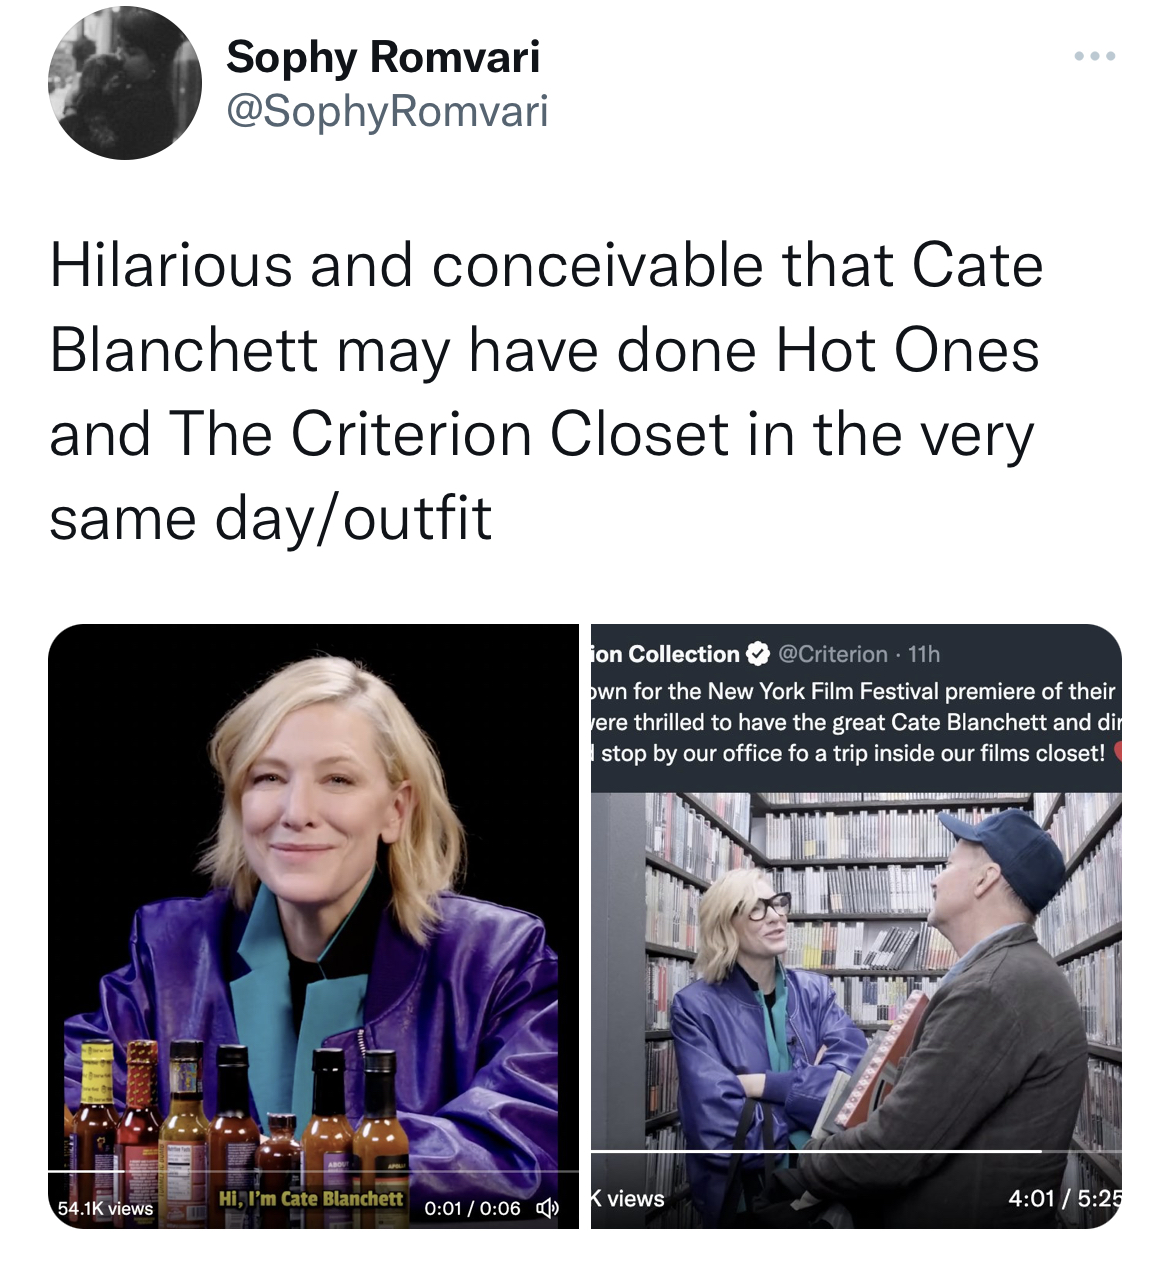 Tweets Roasting Celebs - media - Sophy Romvari Hilarious and conceivable that Cate Blanchett may have done Hot Ones and The Criterion Closet in the very same dayoutfit views Hi I'm Cate Blanchett on Collection 11h own for the New York Film Festival premie